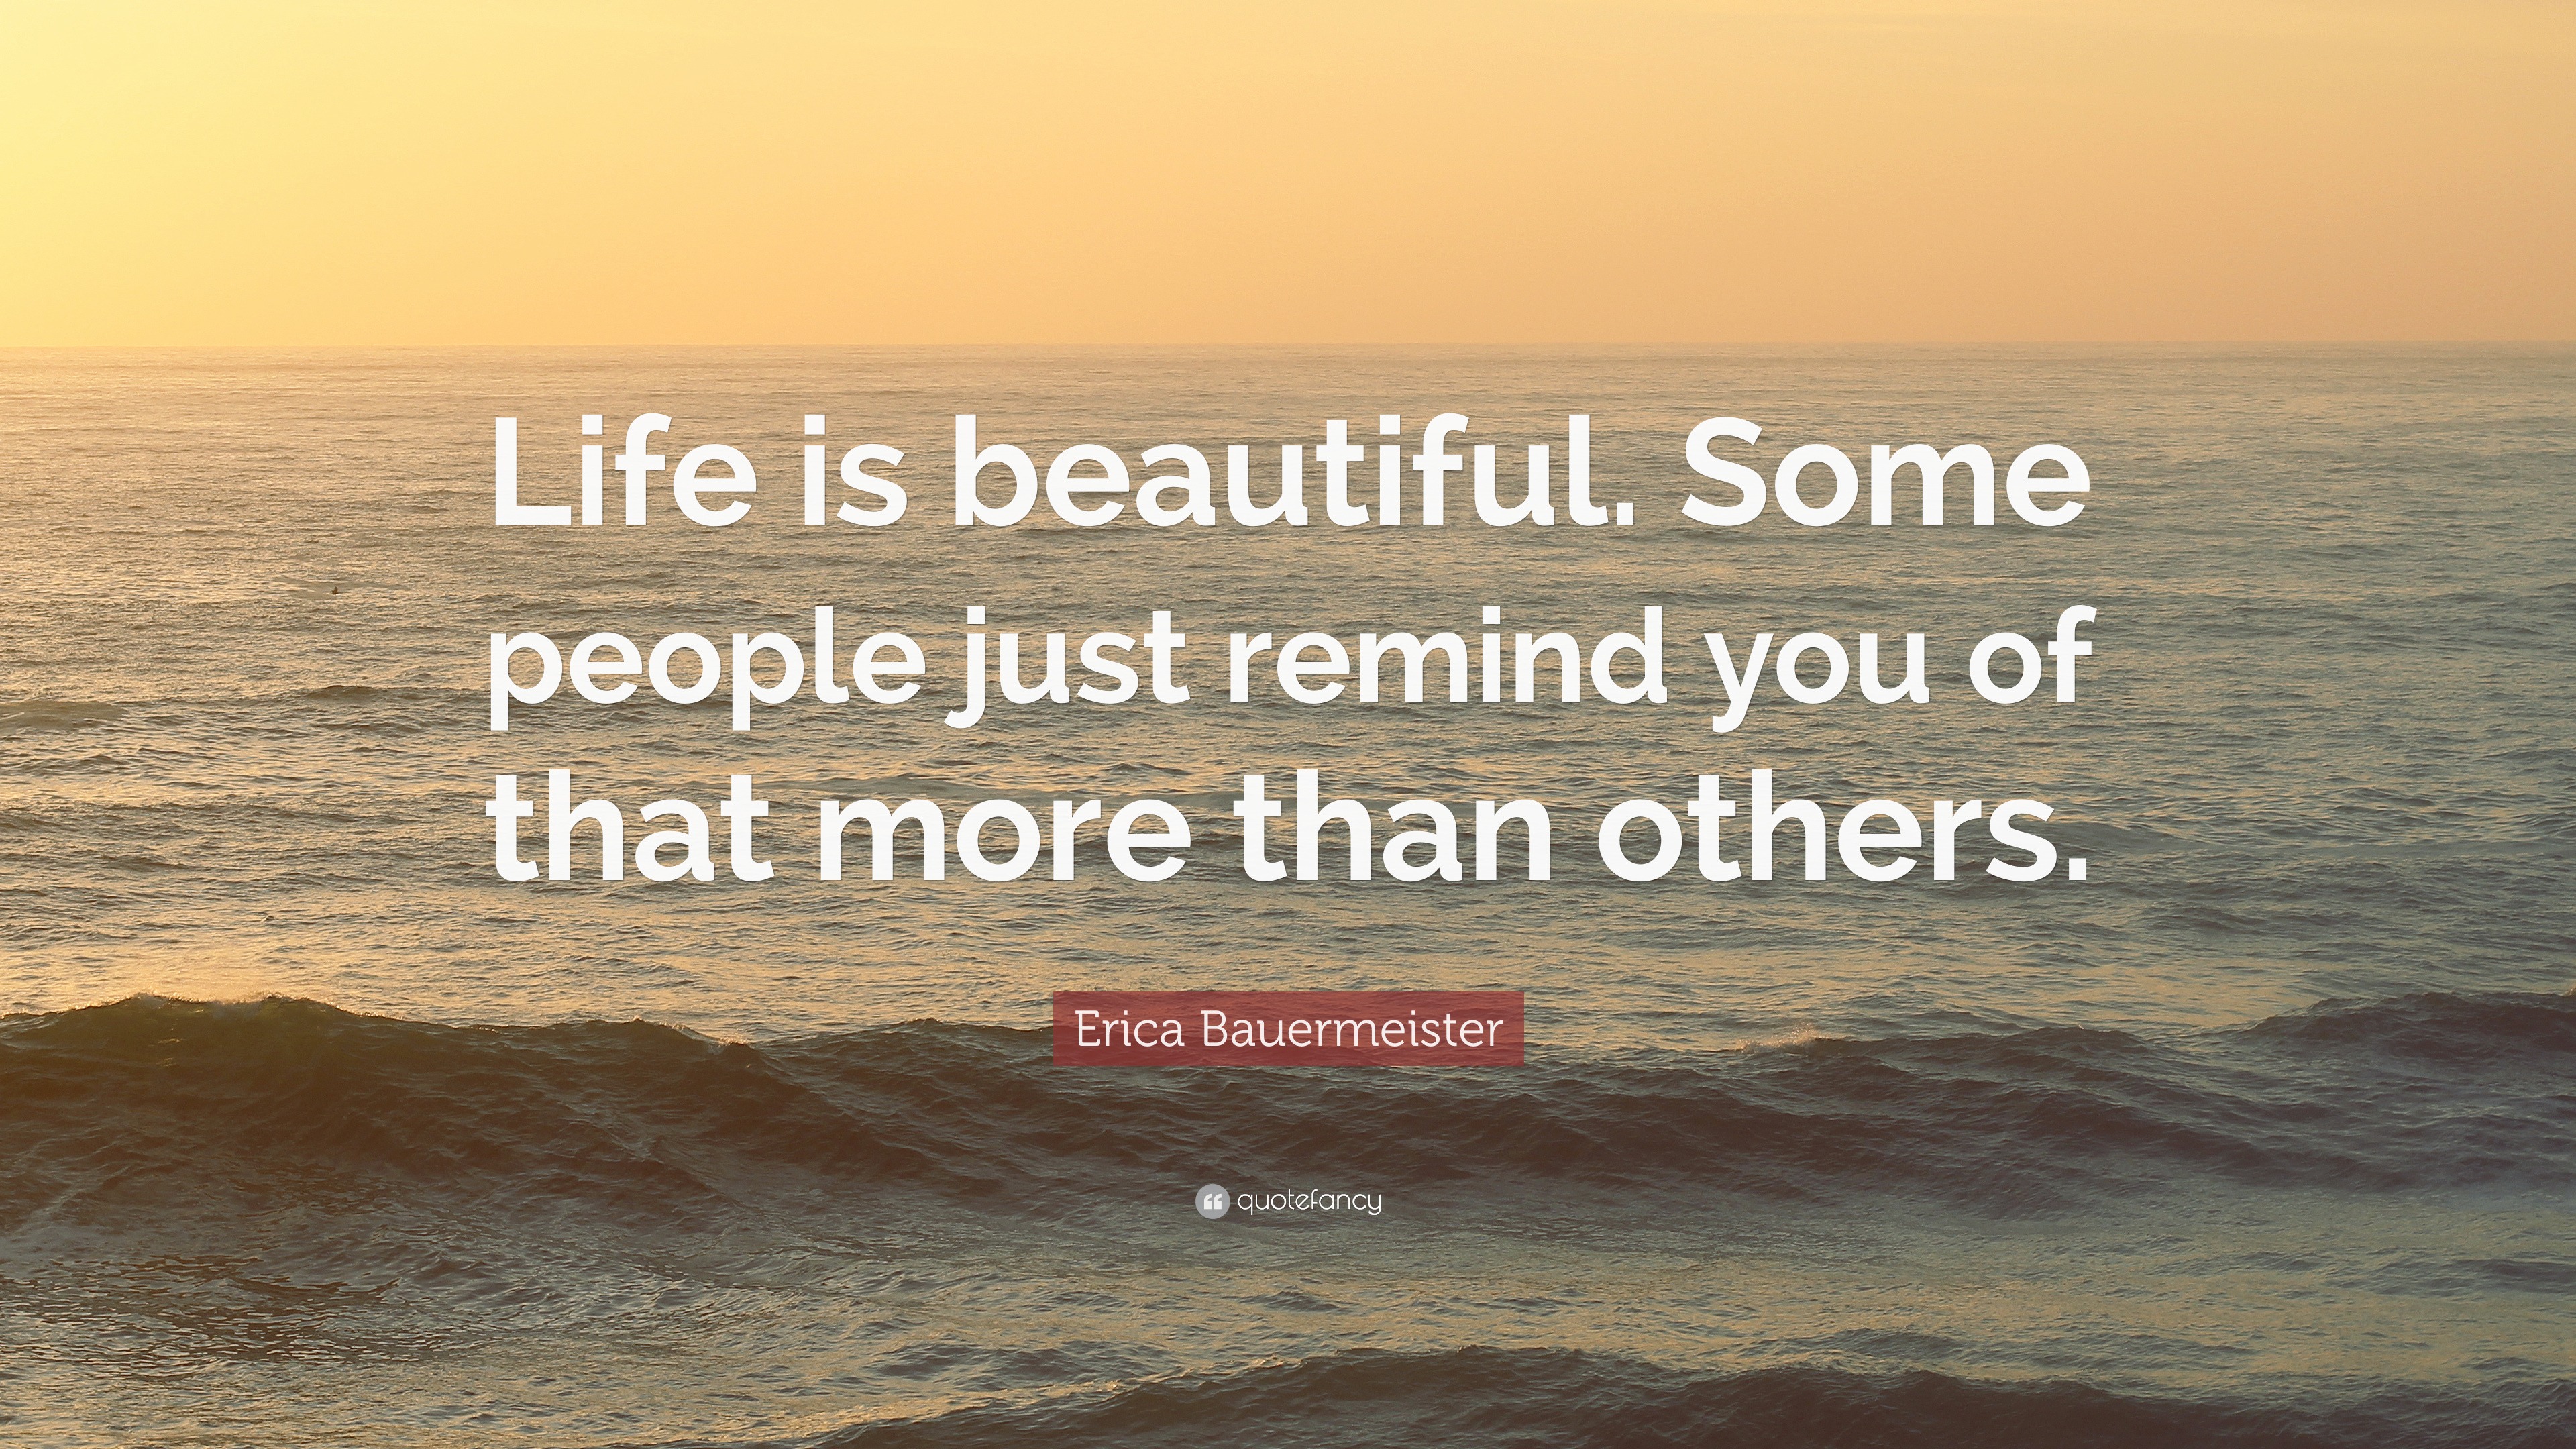 Erica Bauermeister Quote “Life is beautiful Some people just remind you of that